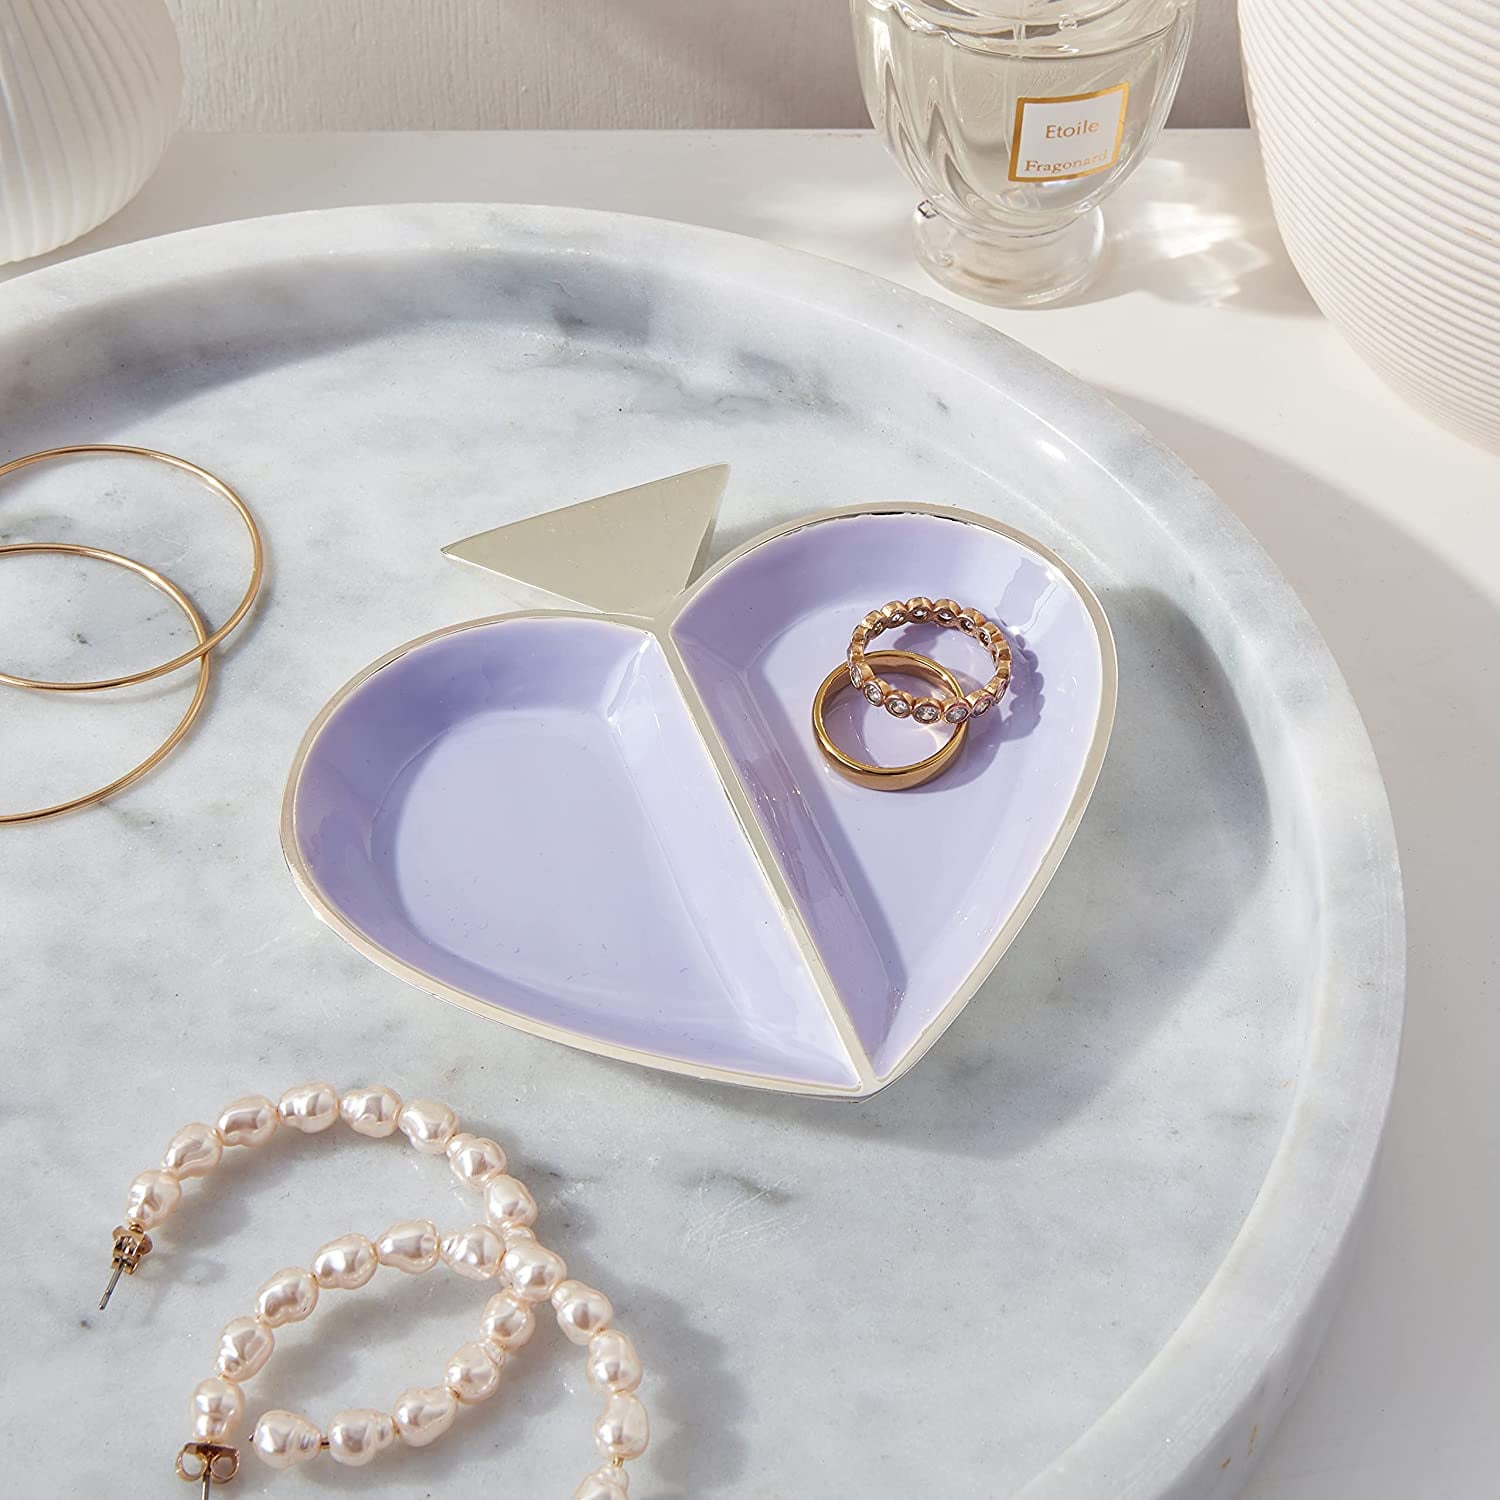 Kate Spade New York Jewelry Dish | Shop Stunning Periwinkle Room Decor If  You're Obsessed With Pantone's 2022 Color of the Year | POPSUGAR Home Photo  8